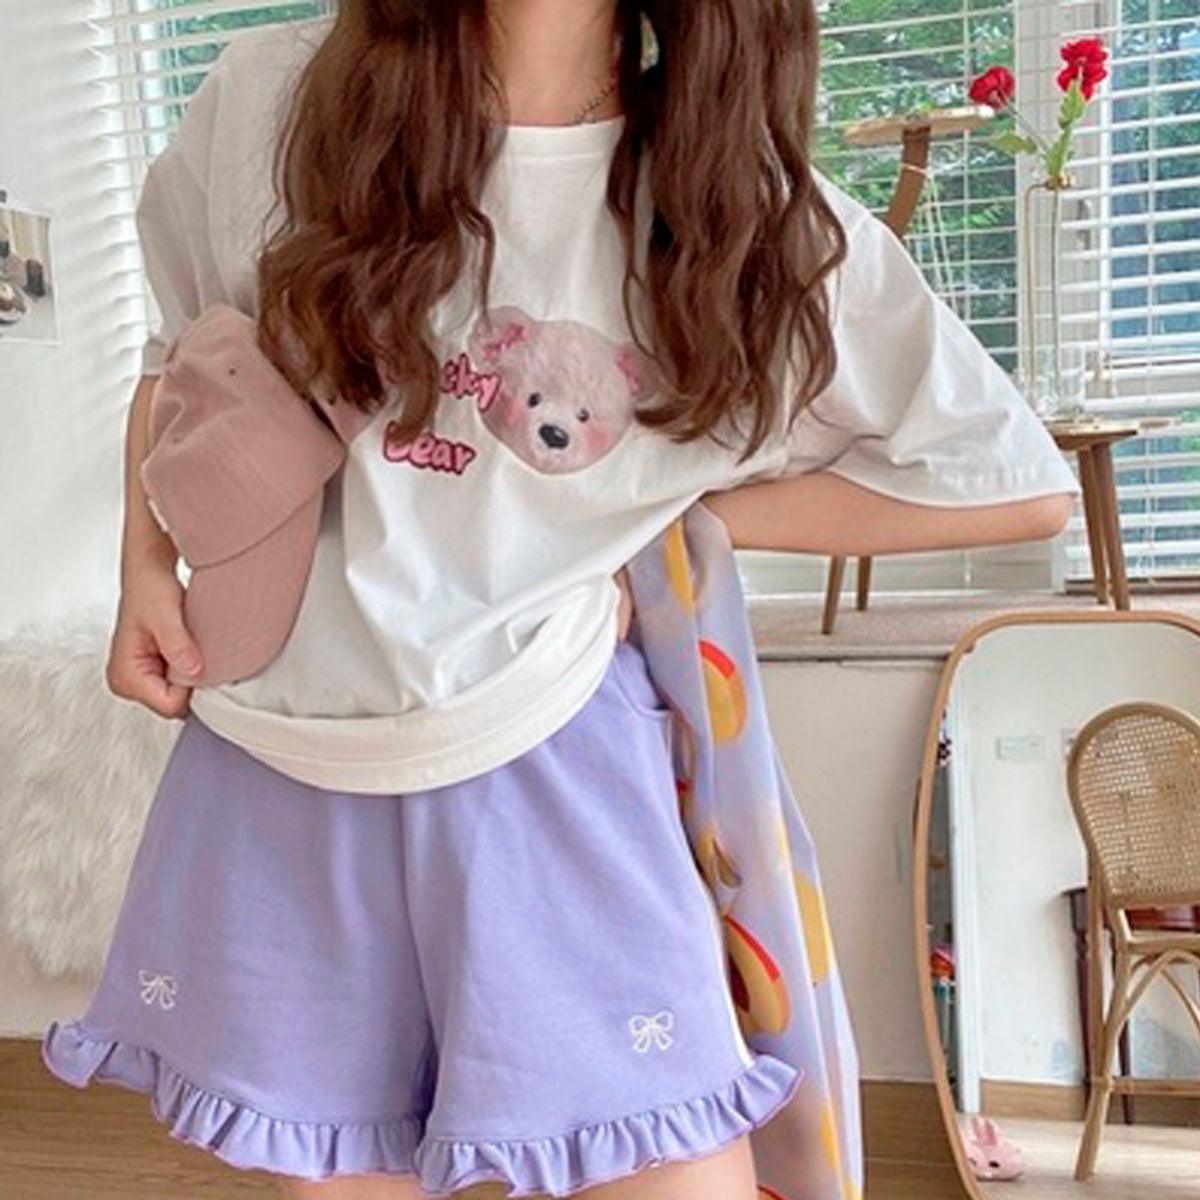 Cute Bows Pastel Pink Softie Shorts - Aesthetic Clothes Shop